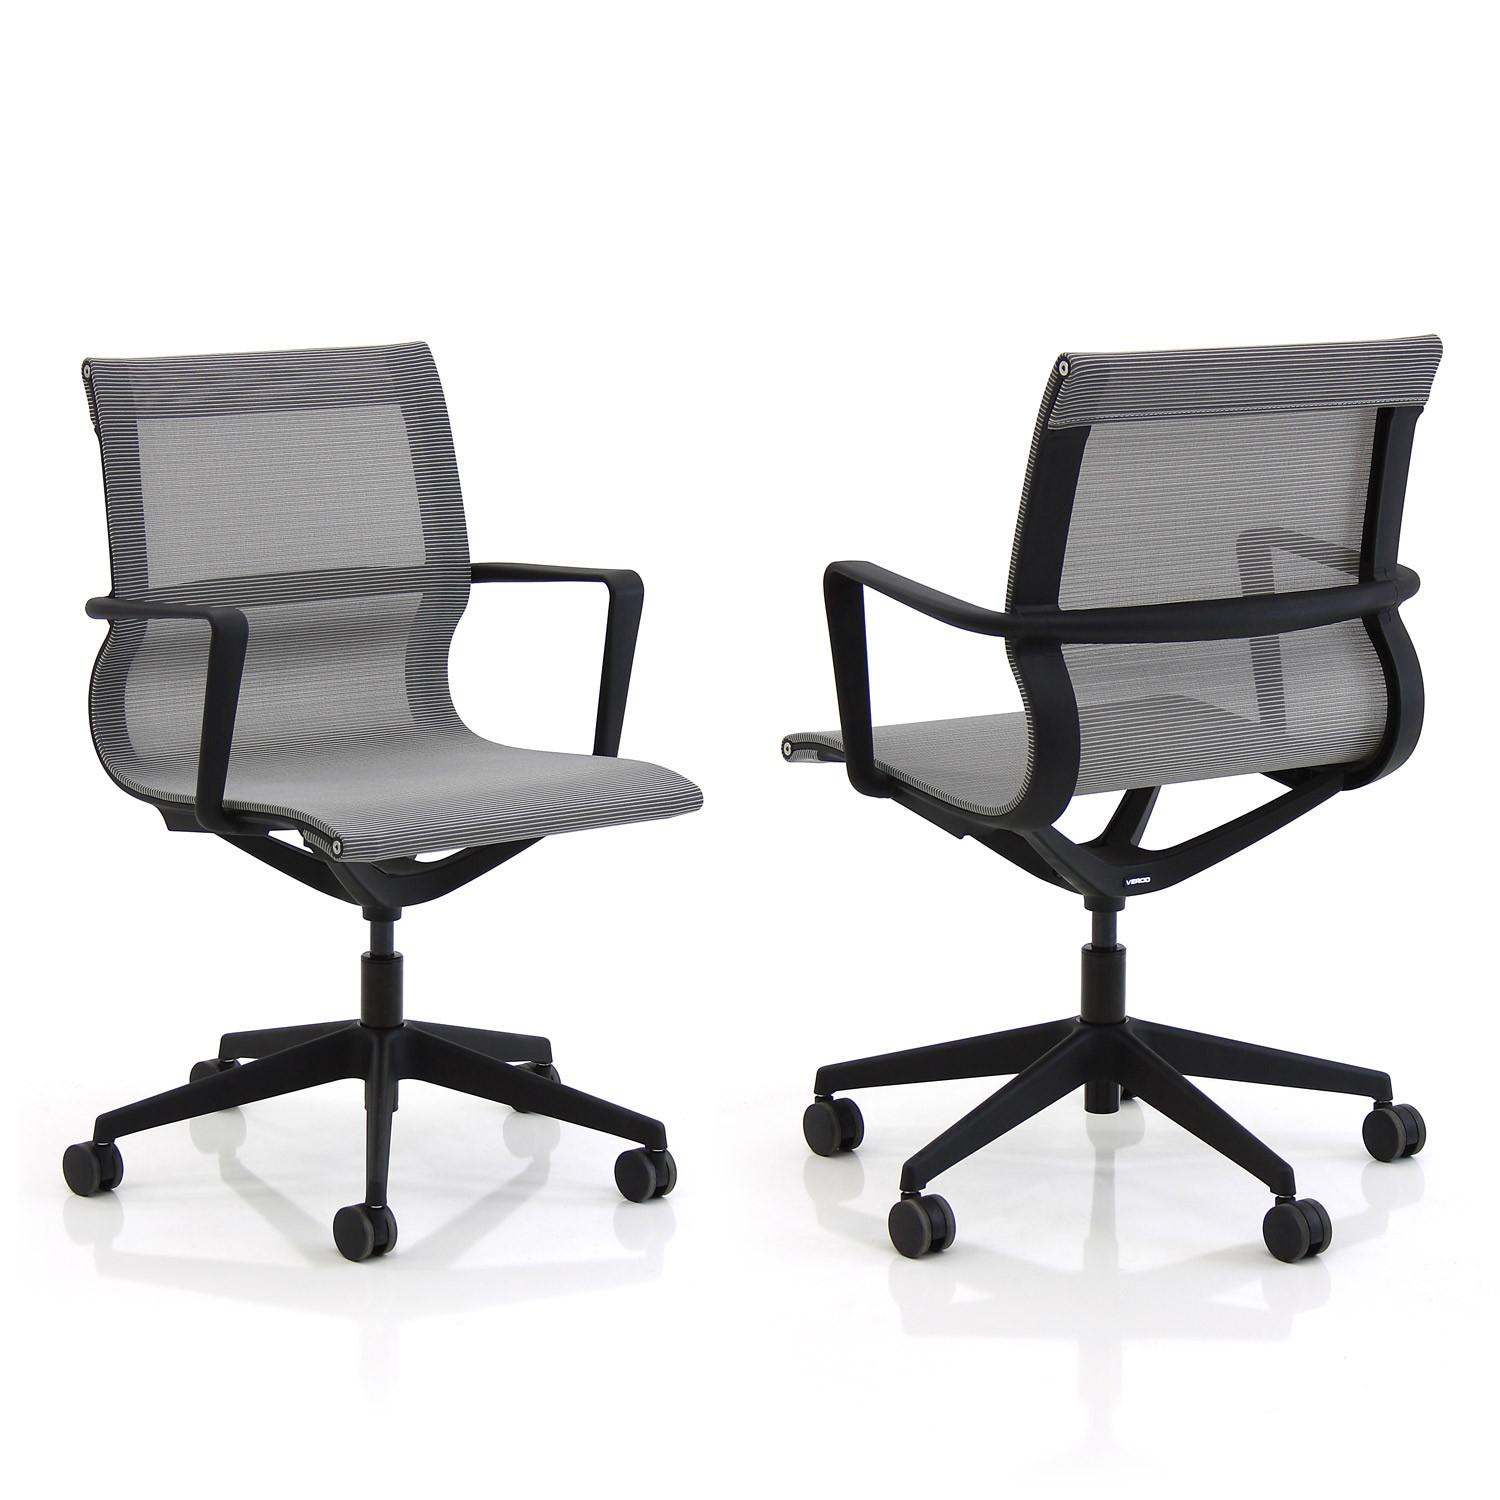 Flux Mesh Chairs